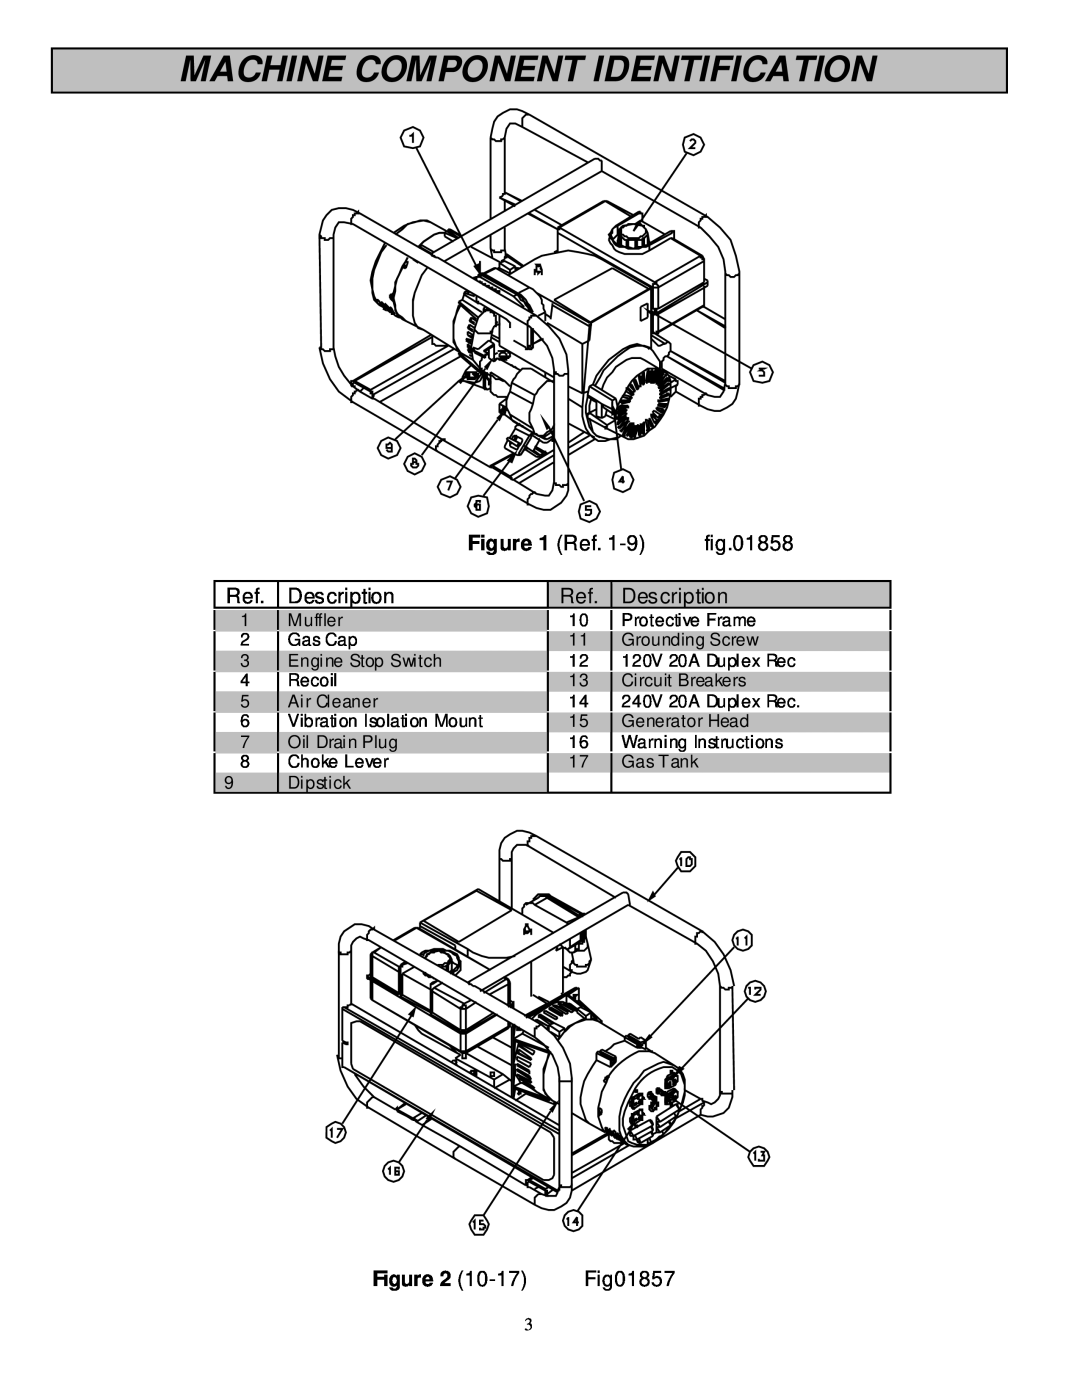 North Star 5000 PG owner manual Machine Component Identification 